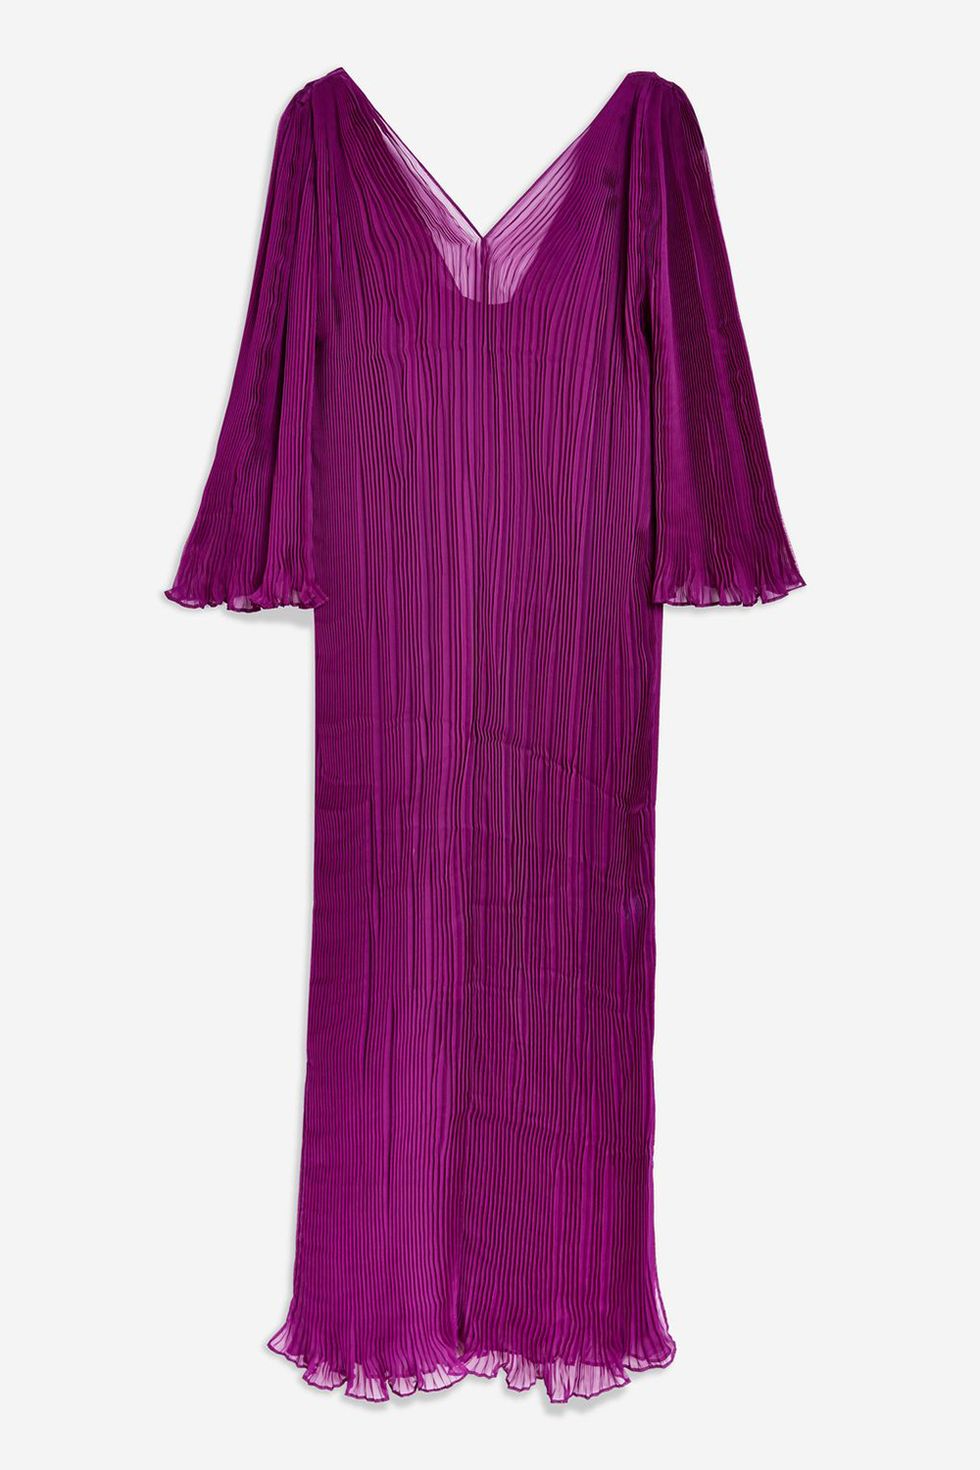 Clothing, Violet, Purple, Magenta, Dress, Pink, Sleeve, Day dress, Cover-up, Neck, 